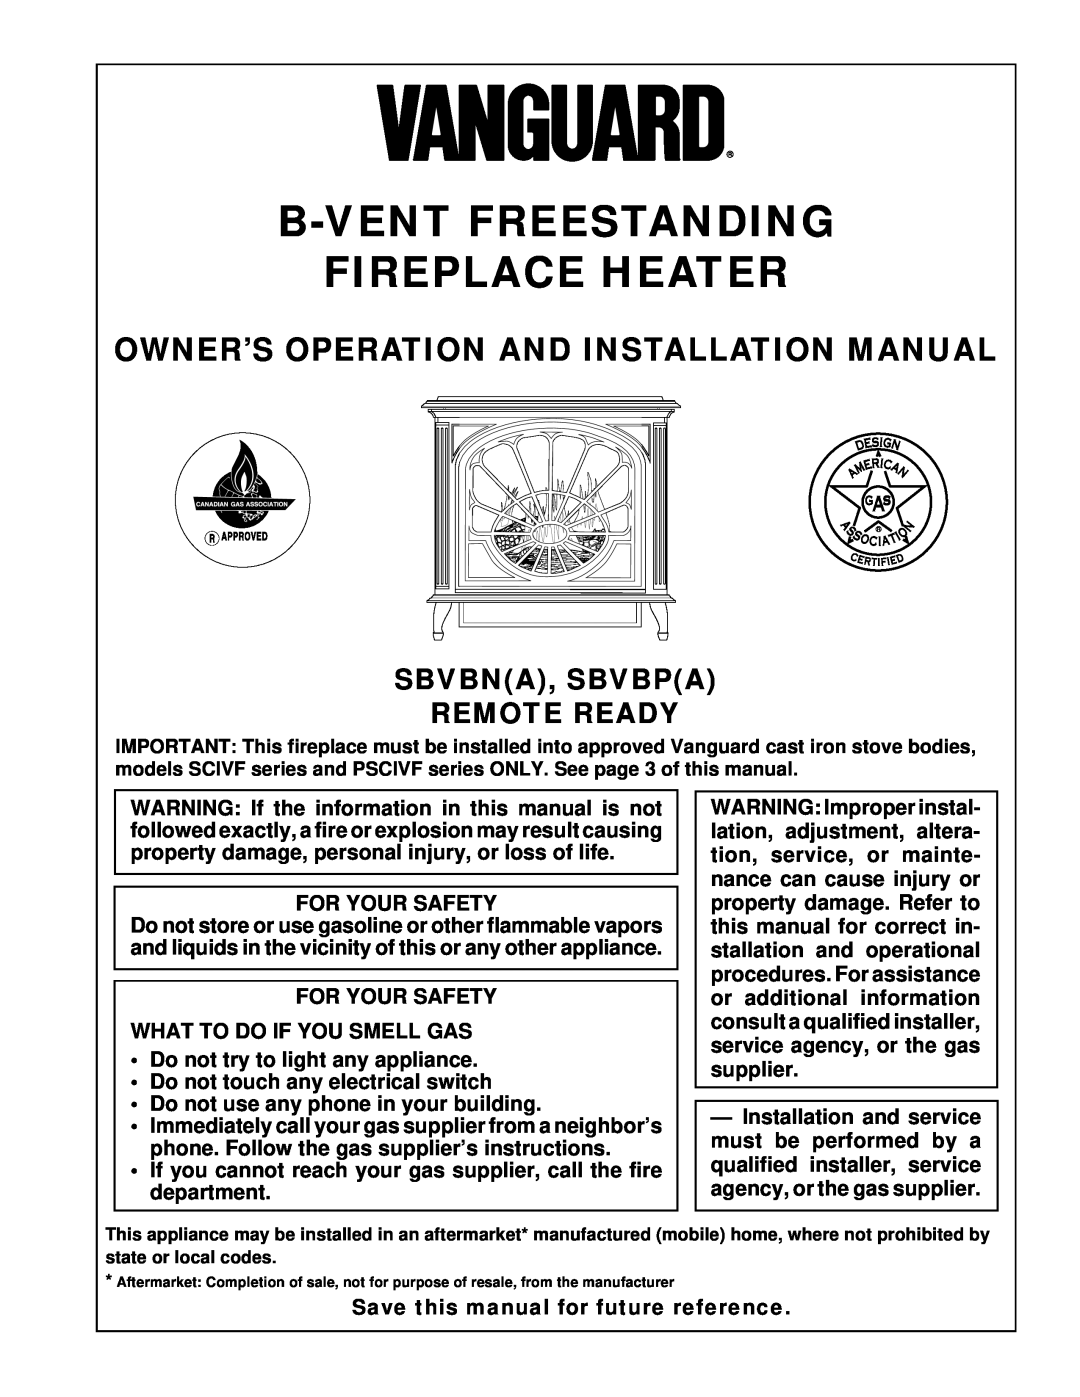 Desa SBVBN(A) installation manual Owner’S Operation And Installation Manual, Sbvbna, Sbvbpa Remote Ready, For Your Safety 